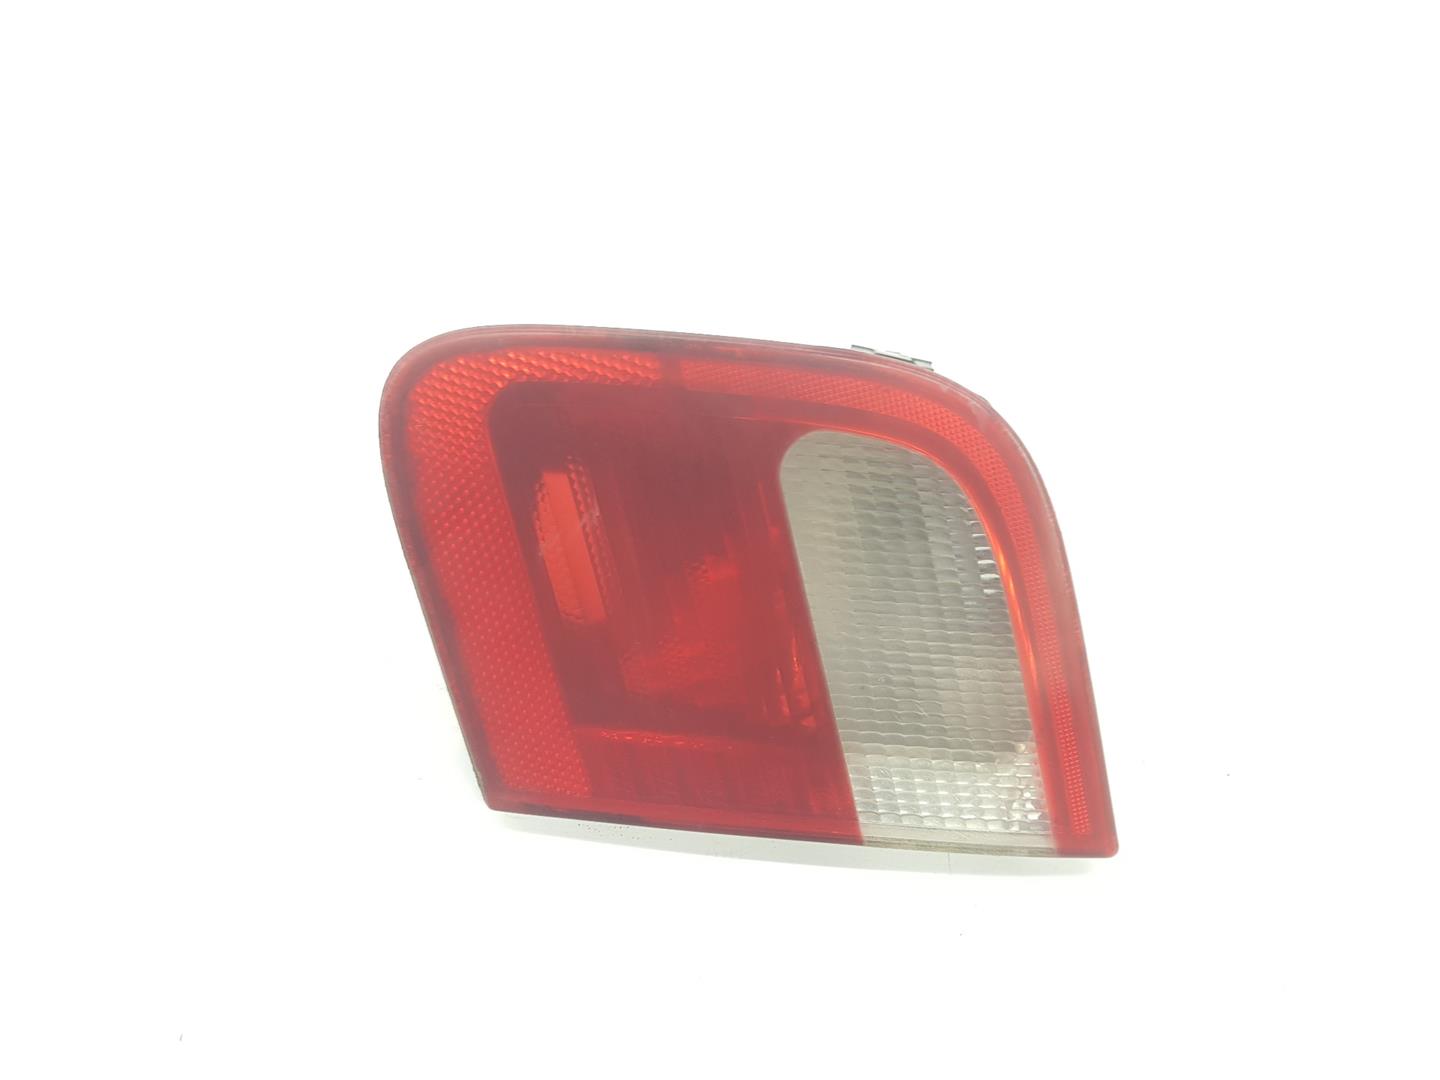 BMW 3 Series E46 (1997-2006) Rear Right Taillight Lamp 63218364924, 63218364924 24135171